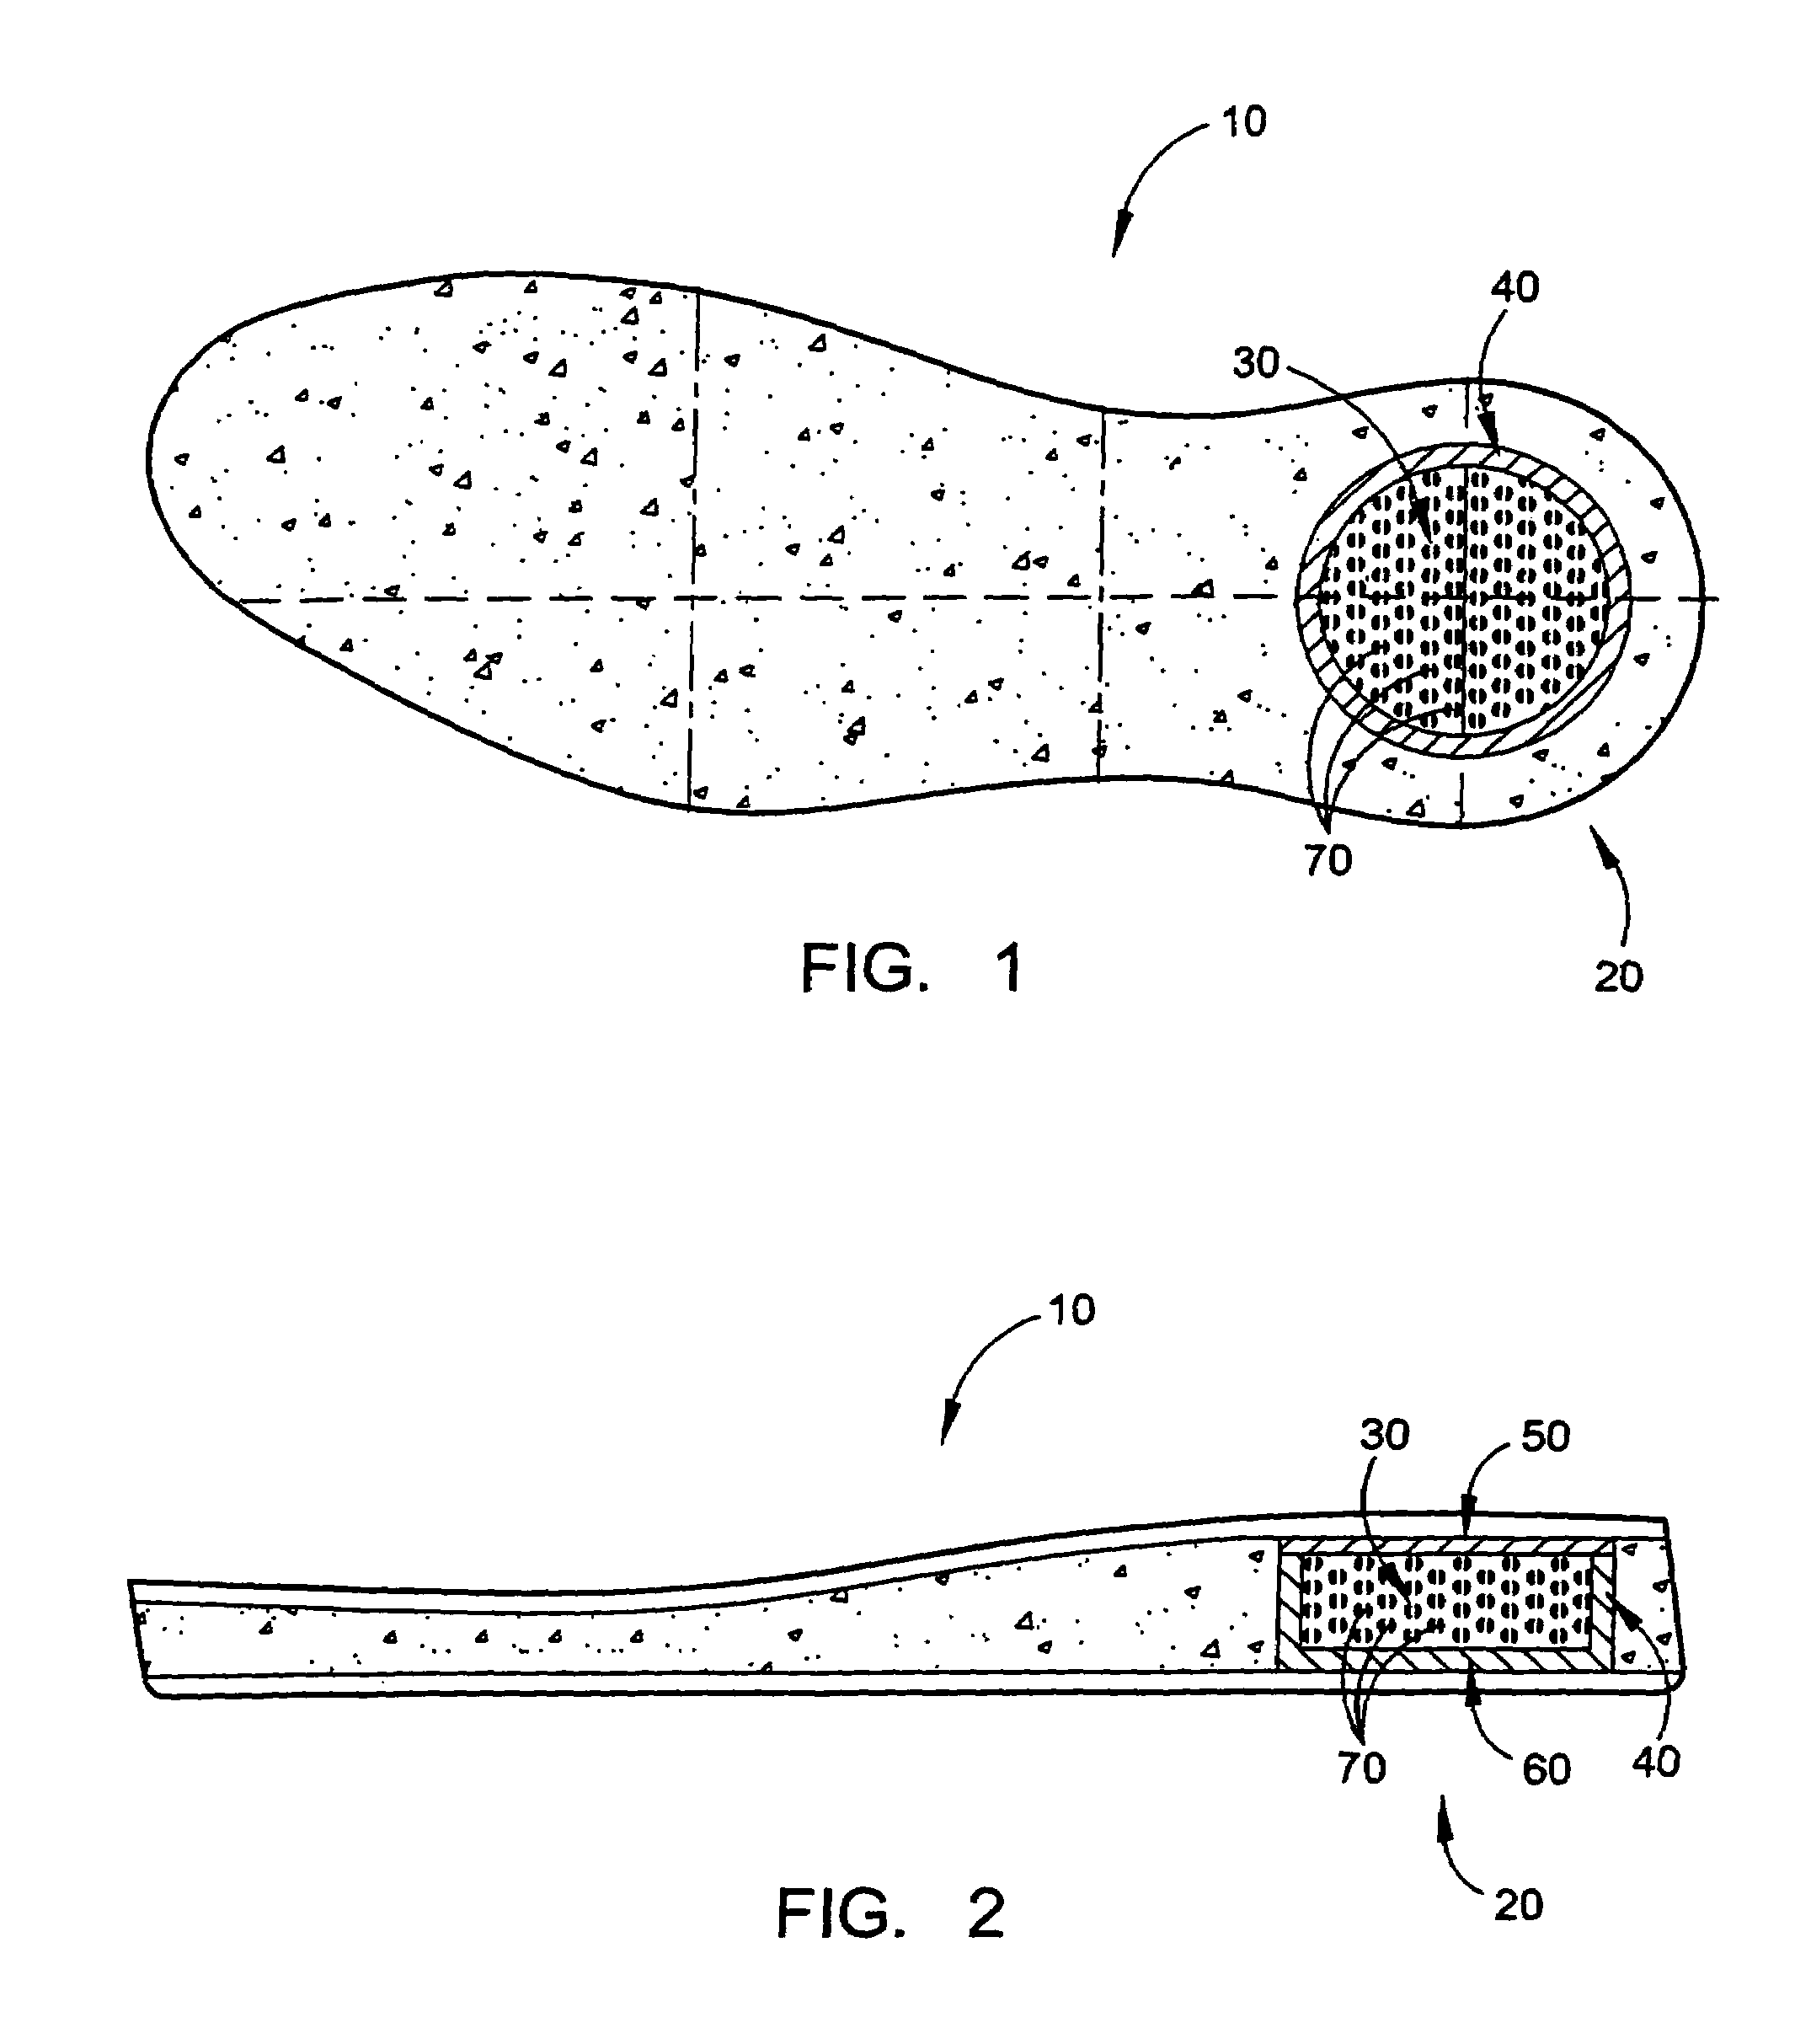 Reversed kinetic system for shoe sole